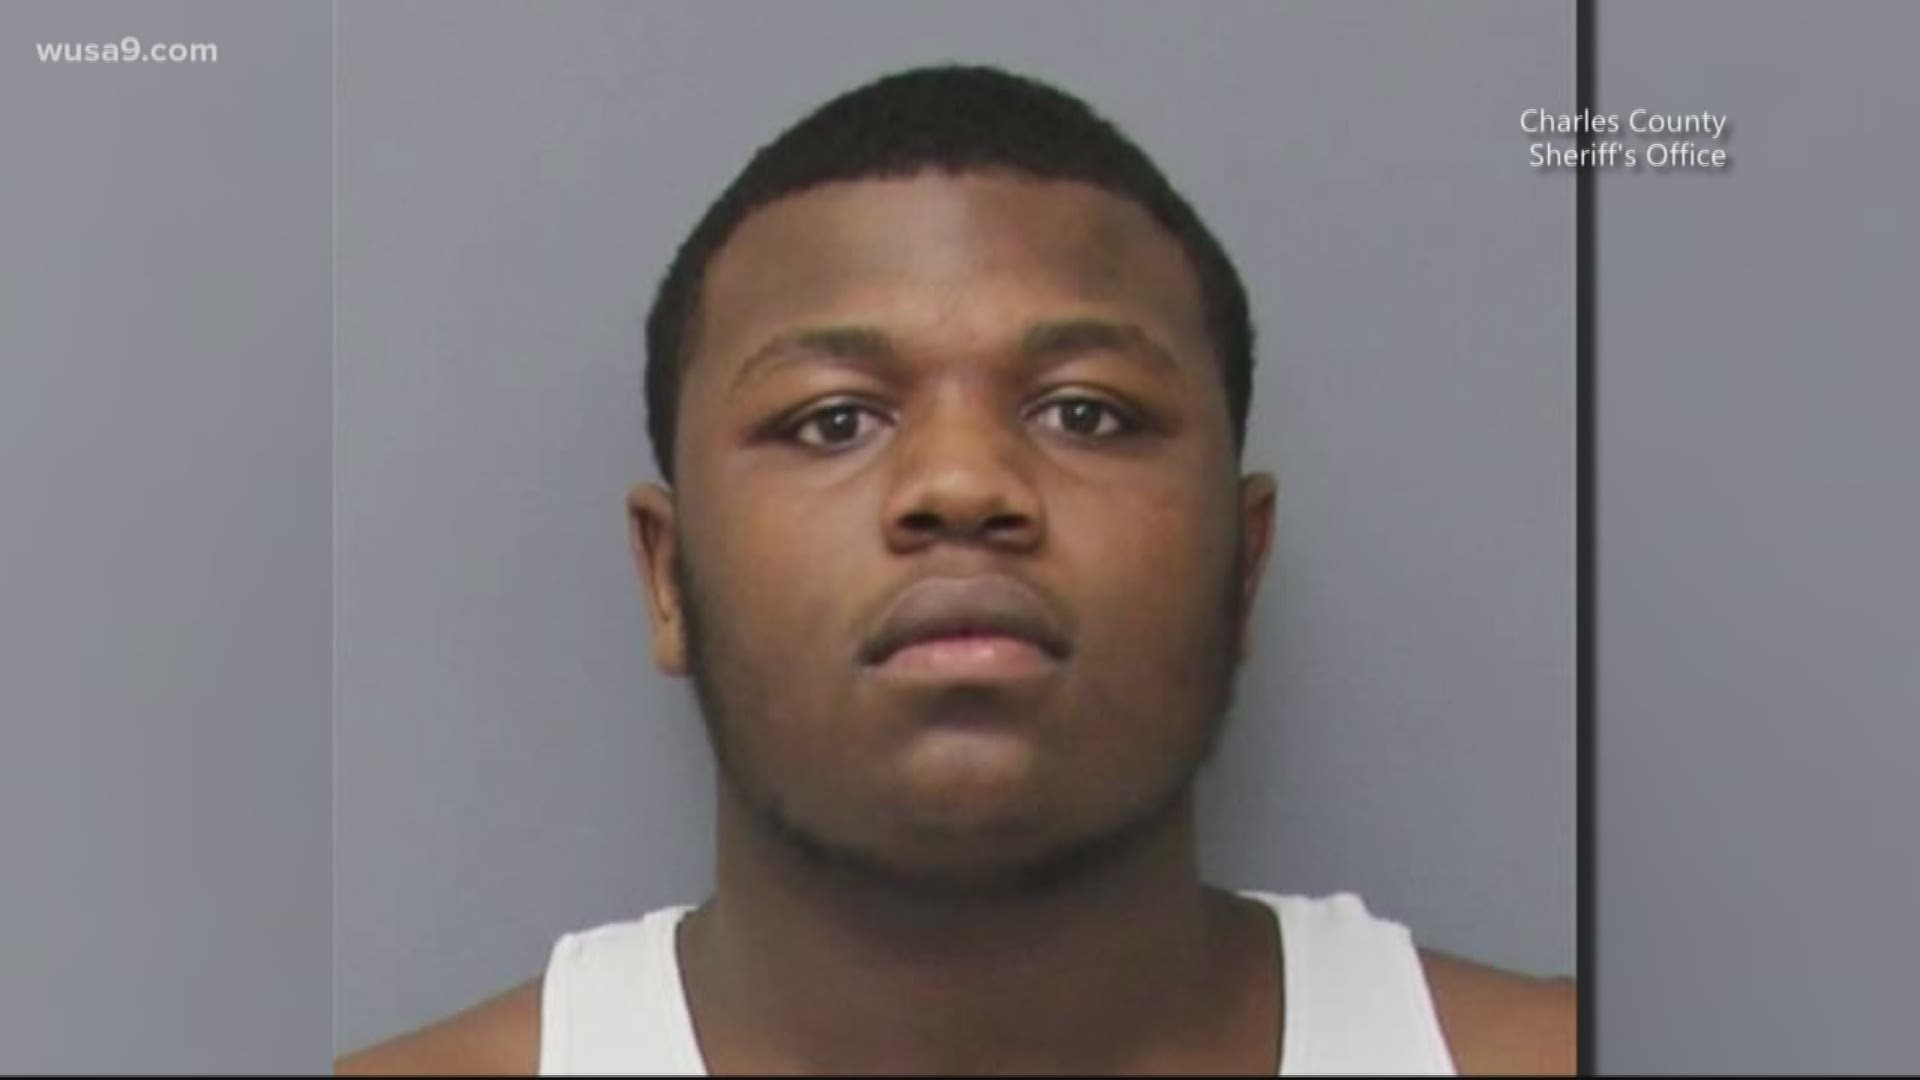 Charles Co. Sheriff’s Office arrested a 17-year-old in the murder of another 17-year-old found shot to death in his driveway. Police said it "appears drug-related."